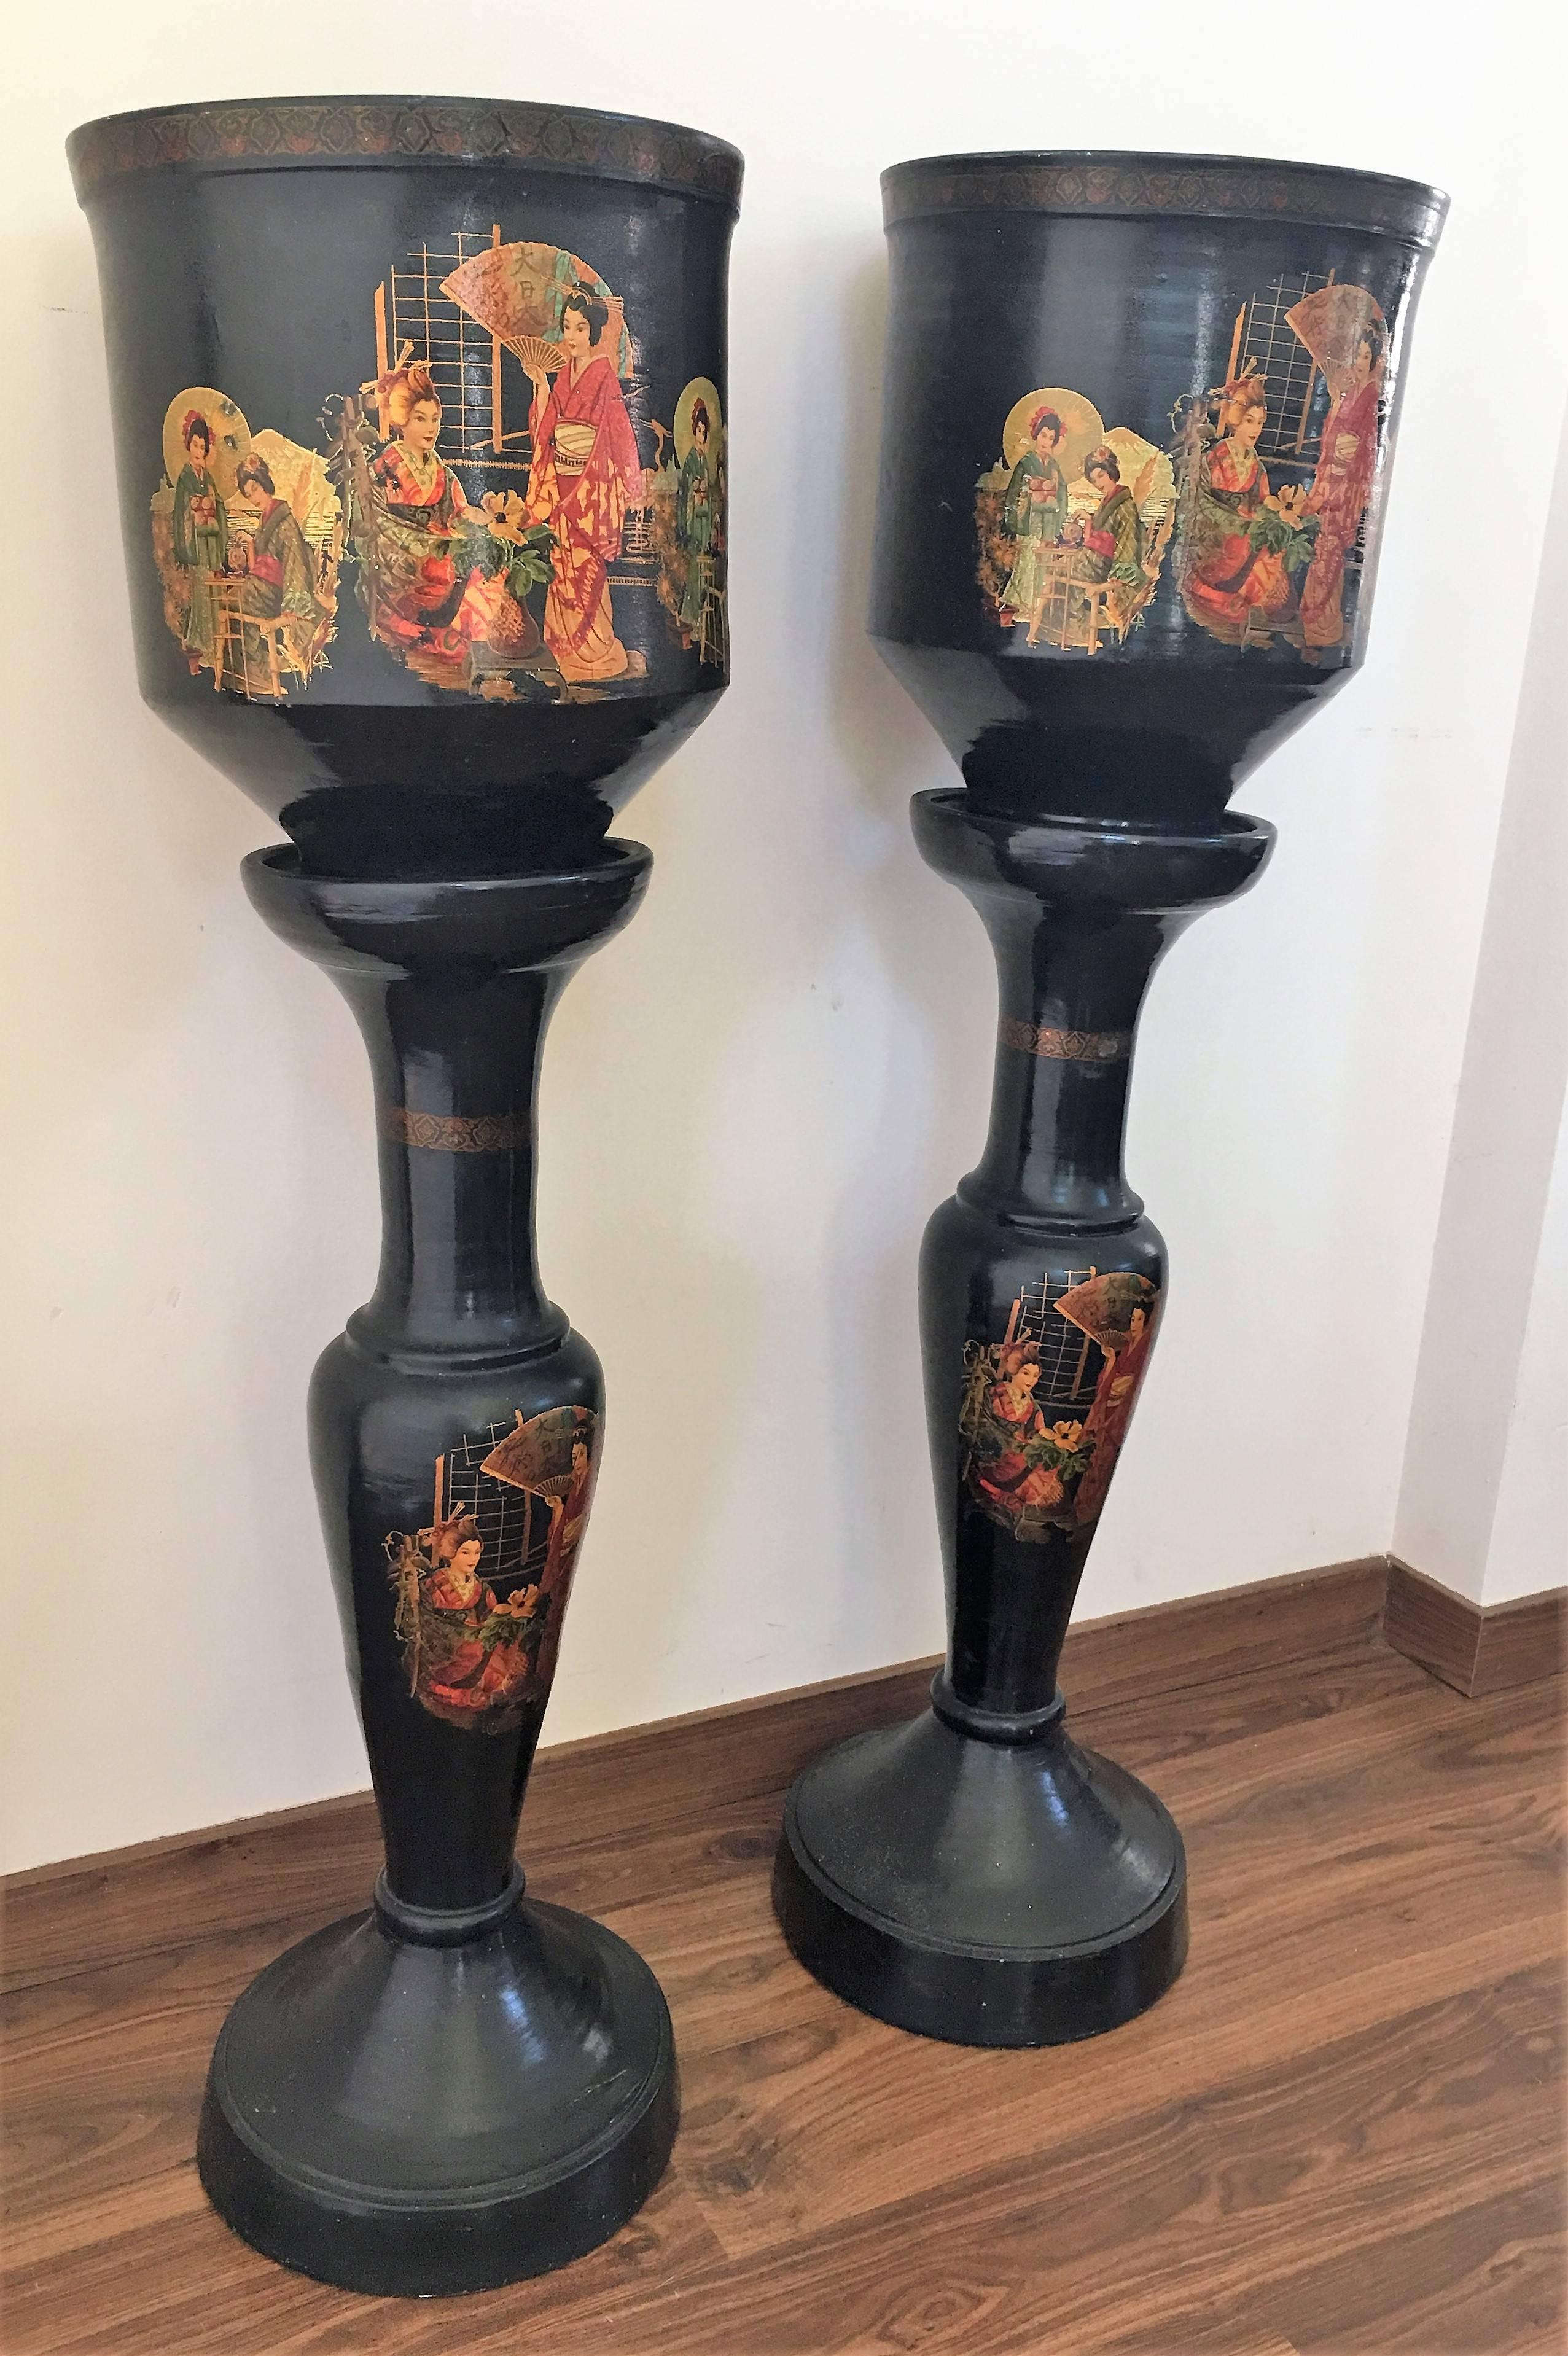 Pair of Large Chinoiserie Style Urns or Vases on Pedestals of Glazed Terracotta In Good Condition For Sale In Miami, FL